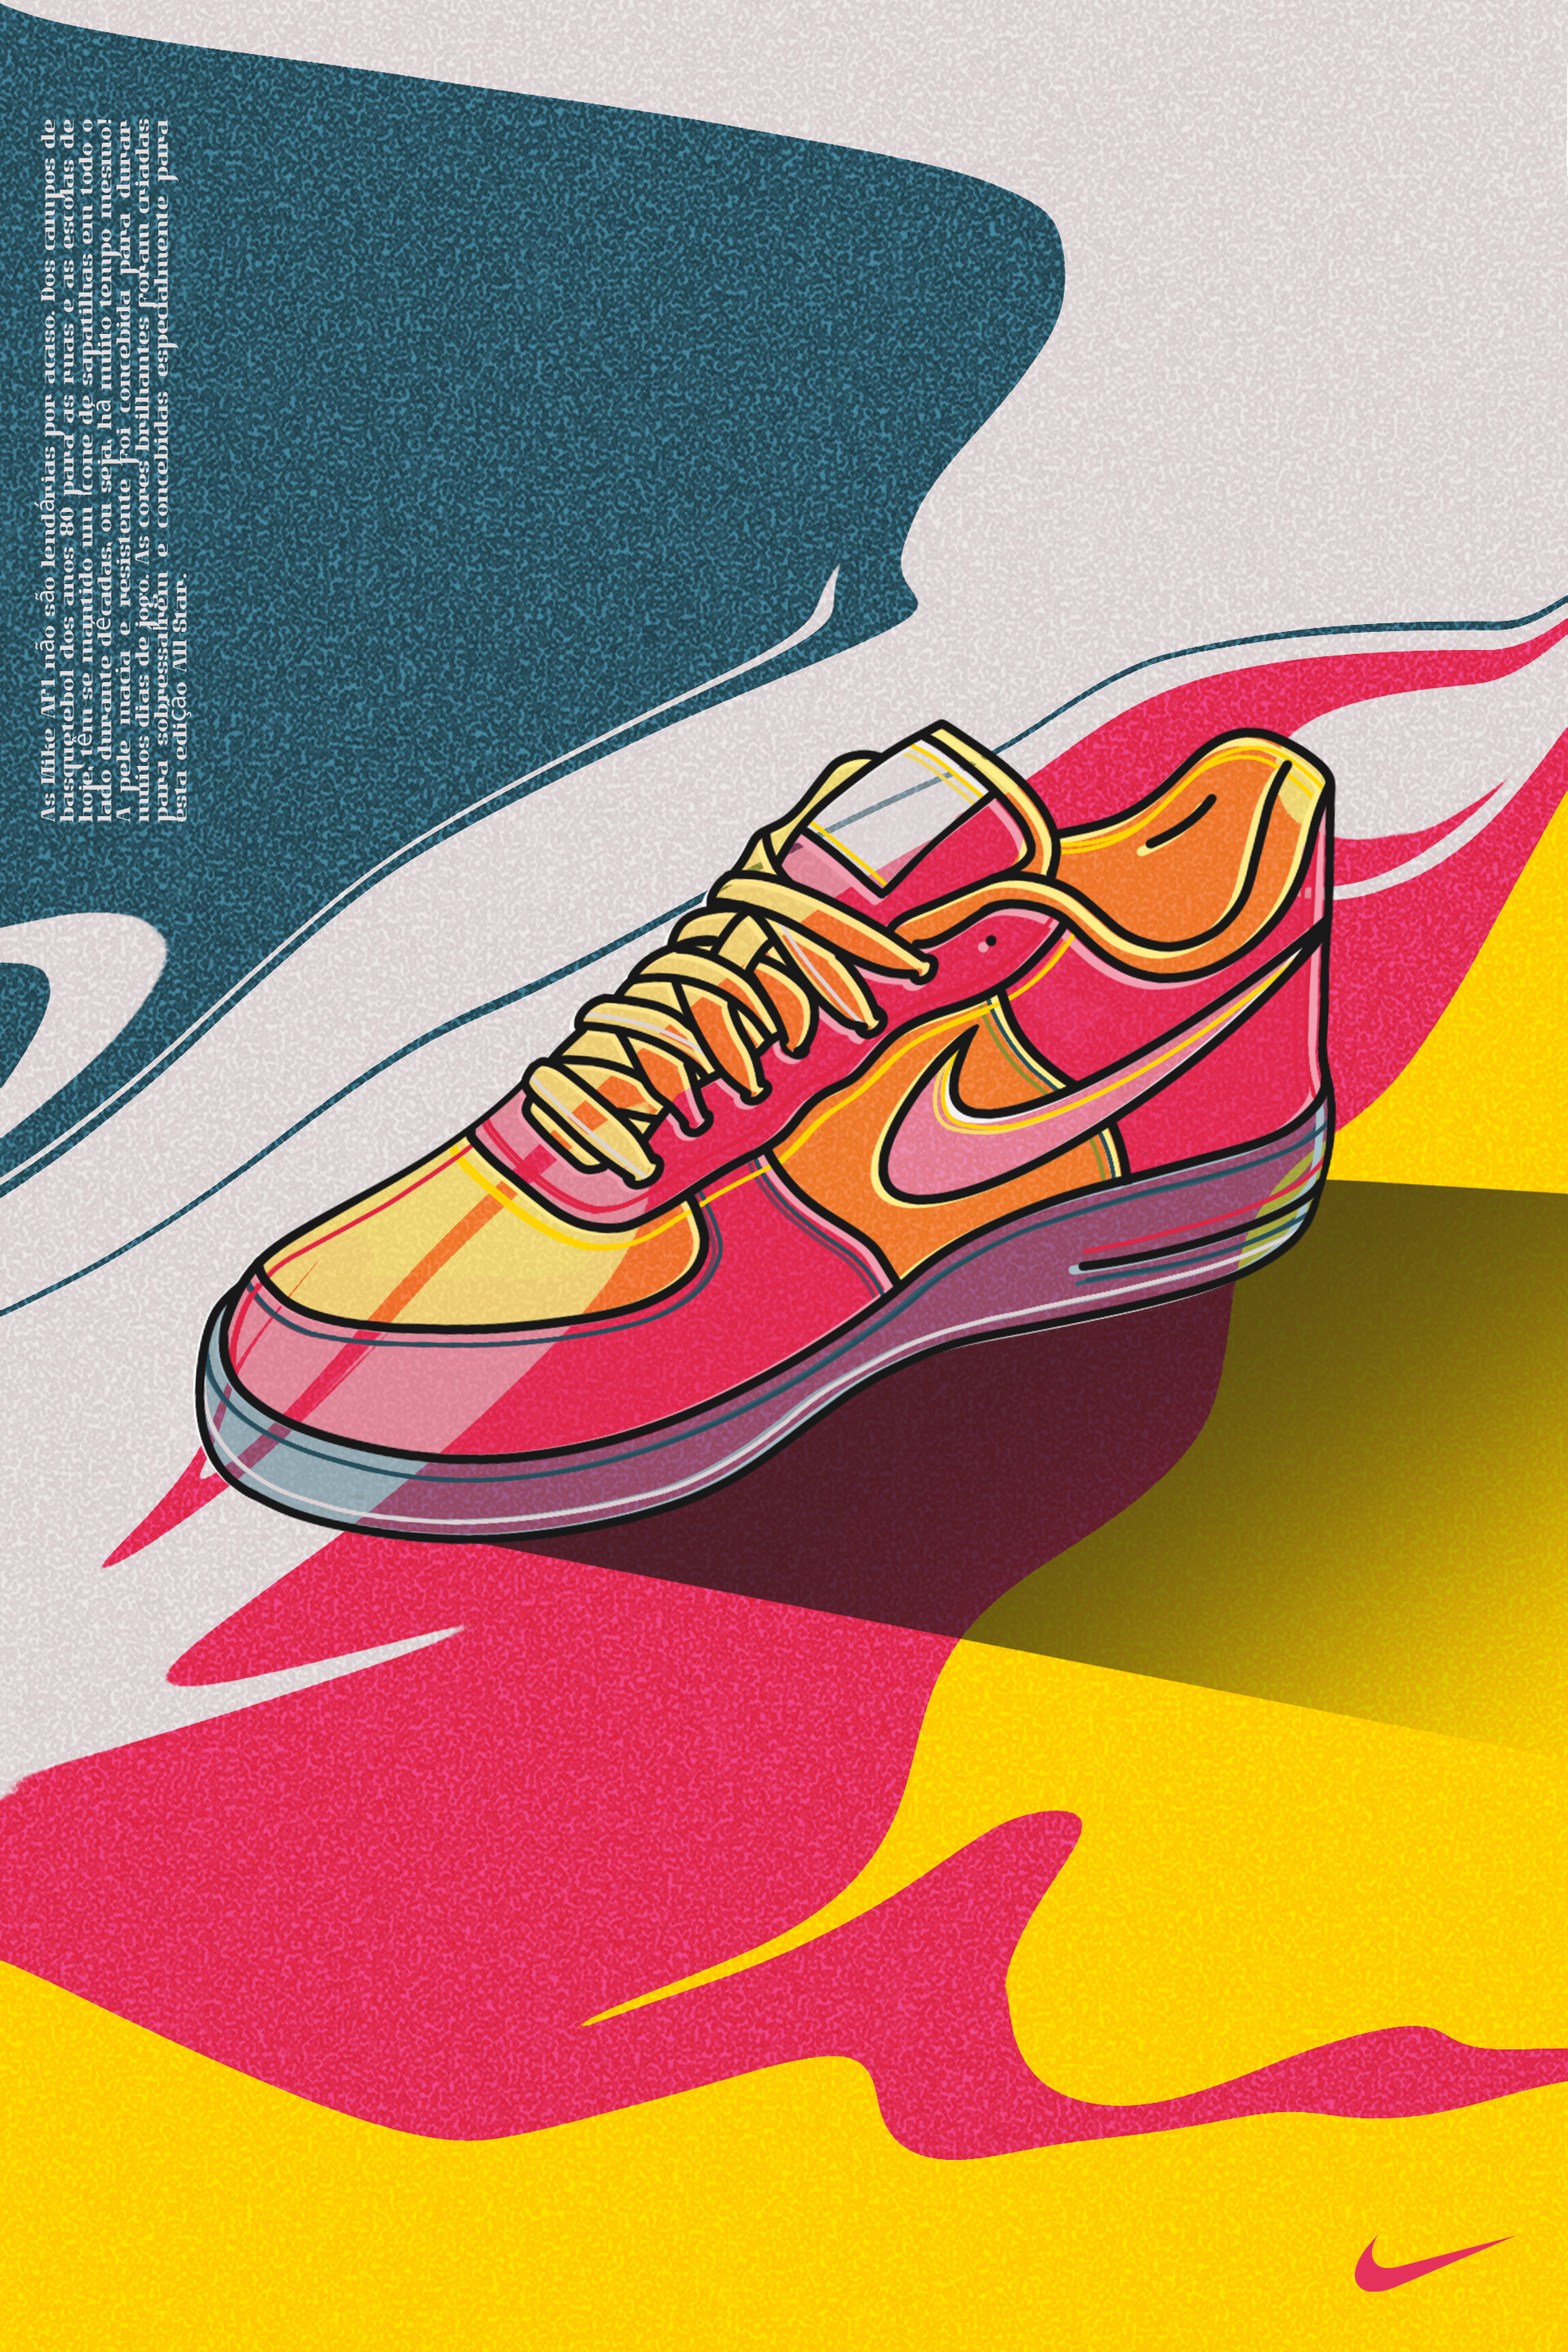 Nike Air Force One printed poster